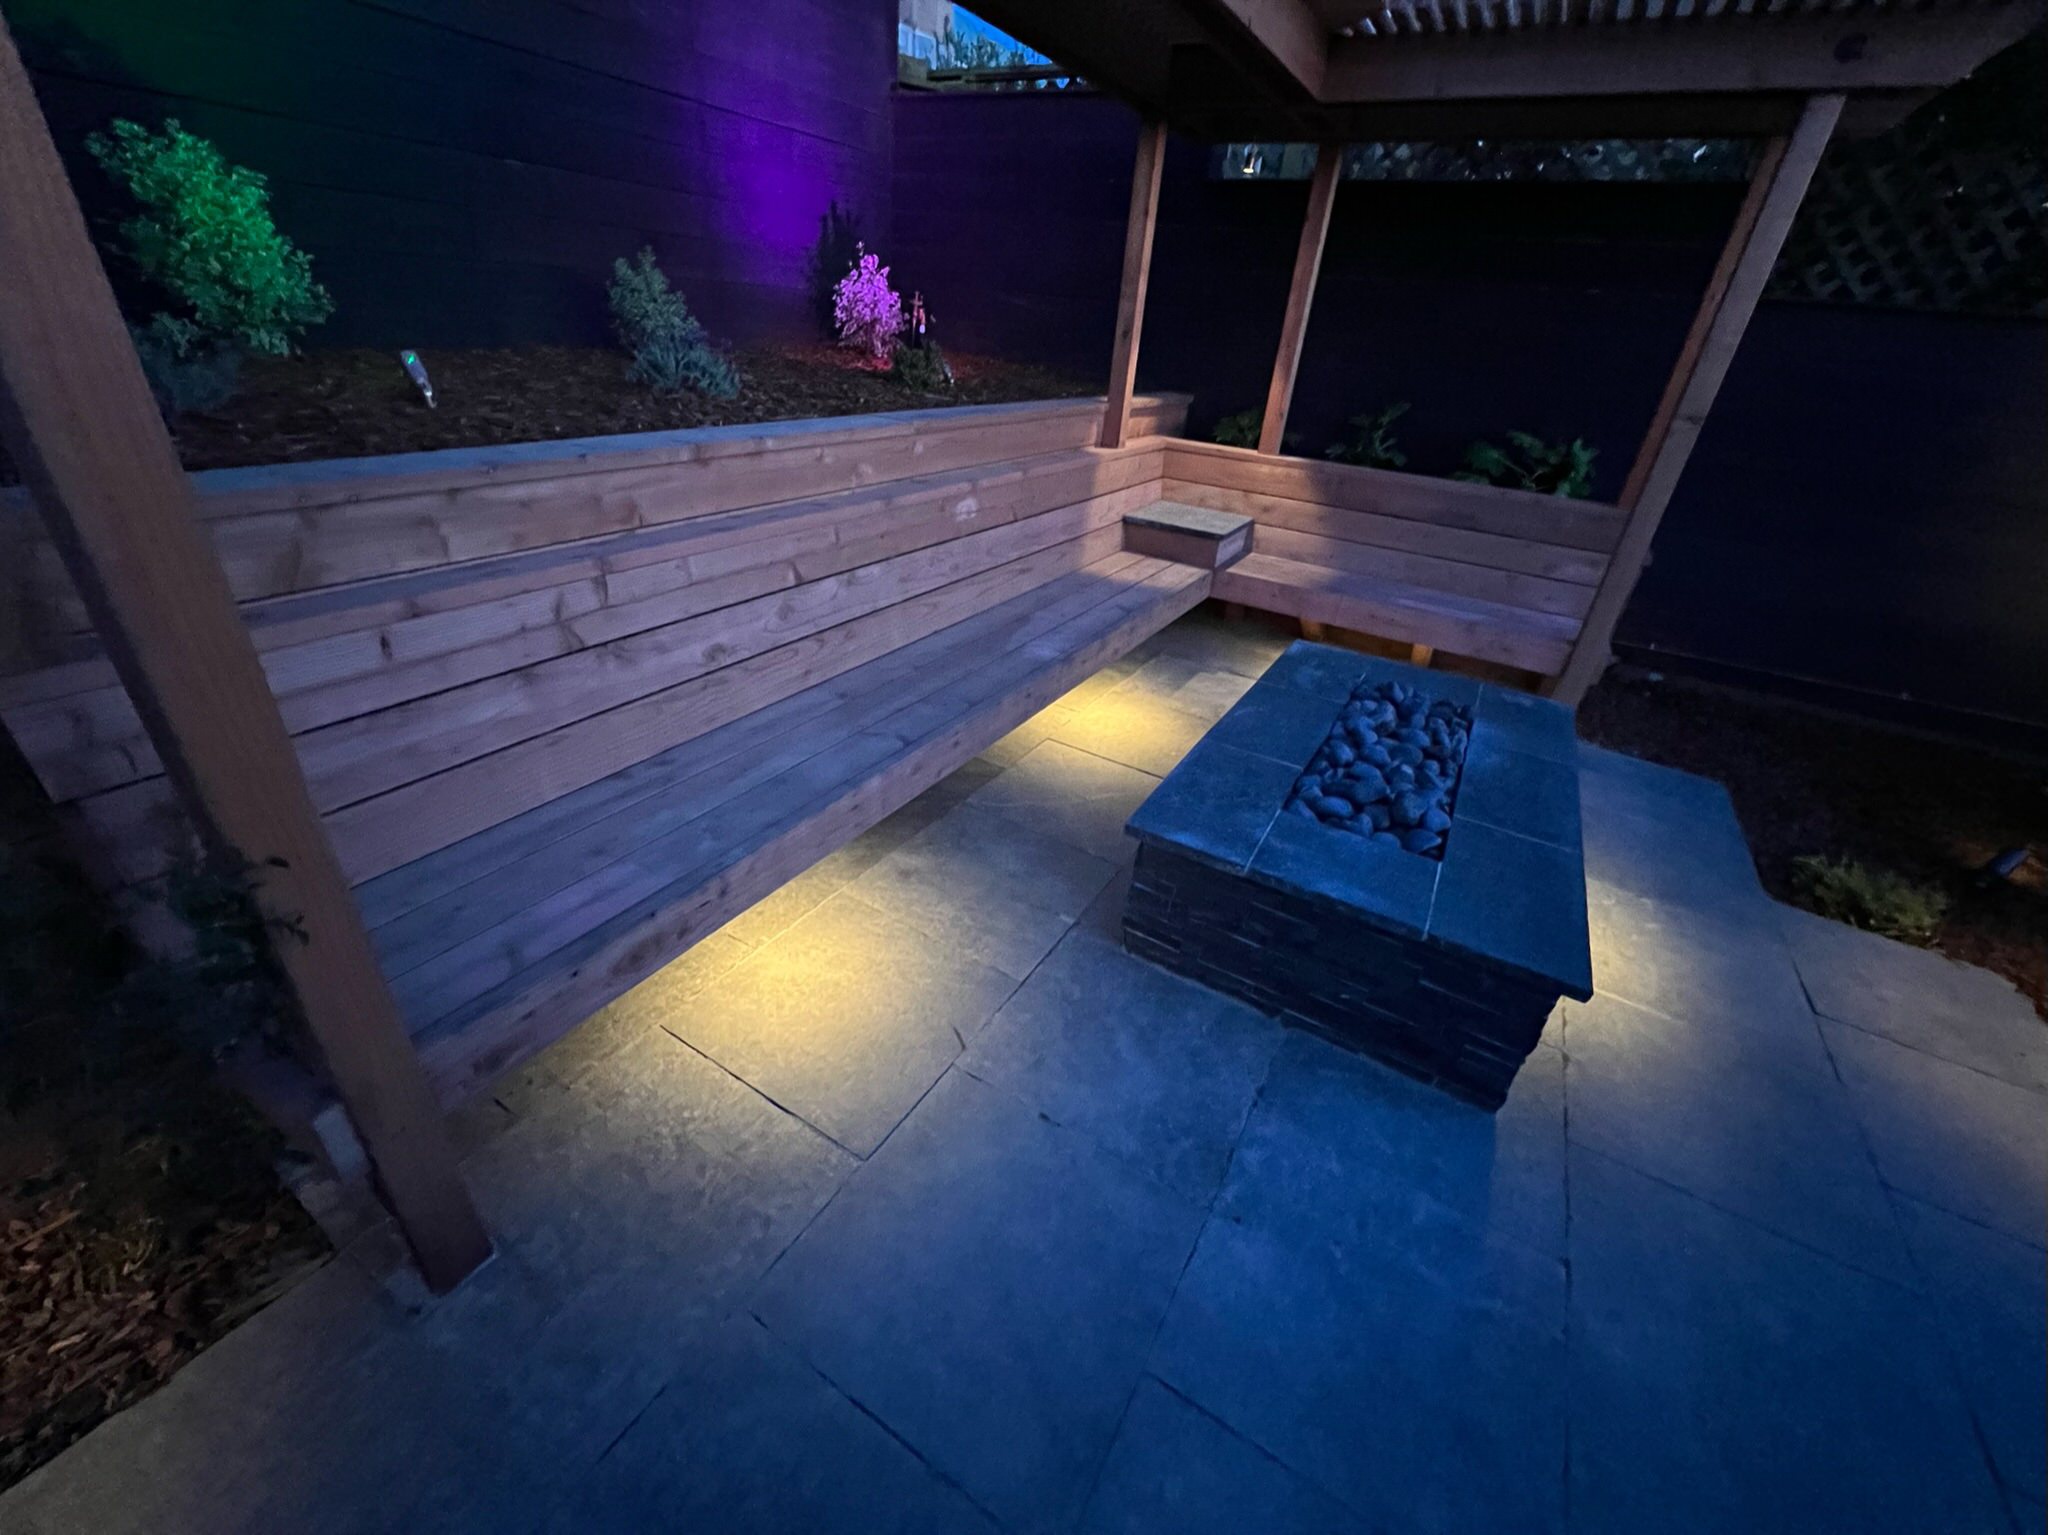 Redwood bench, pergola, fire pit, and basalt patio at night at our Outer Sunset, San Francisco project. Warm yellow lights under bench. Purple and green lights in back of raised planted behind bench.